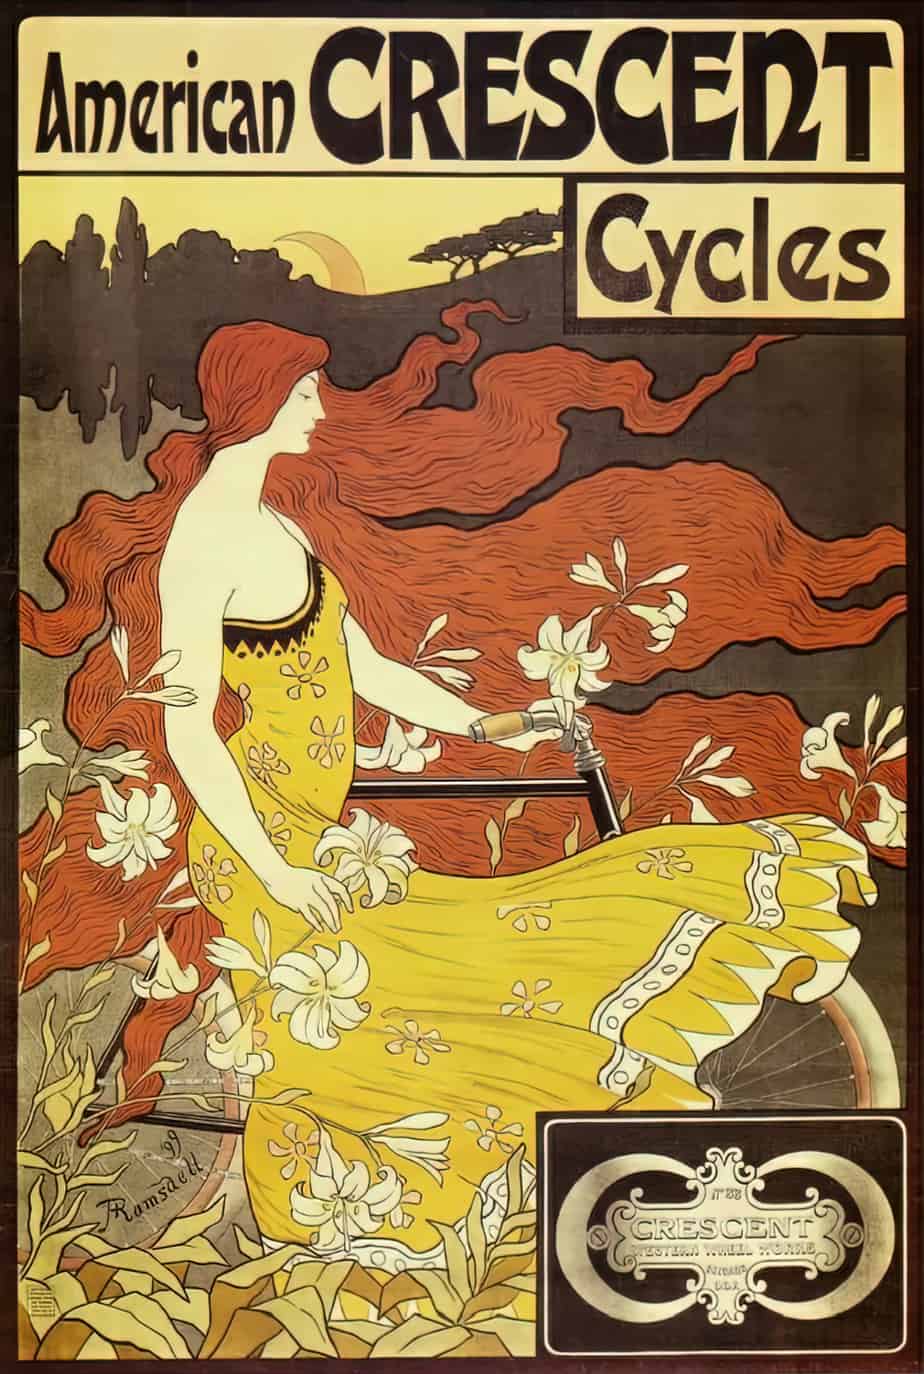 American Crescent Cycles poster, 1899 by Frederick Winthrop Ramsdell